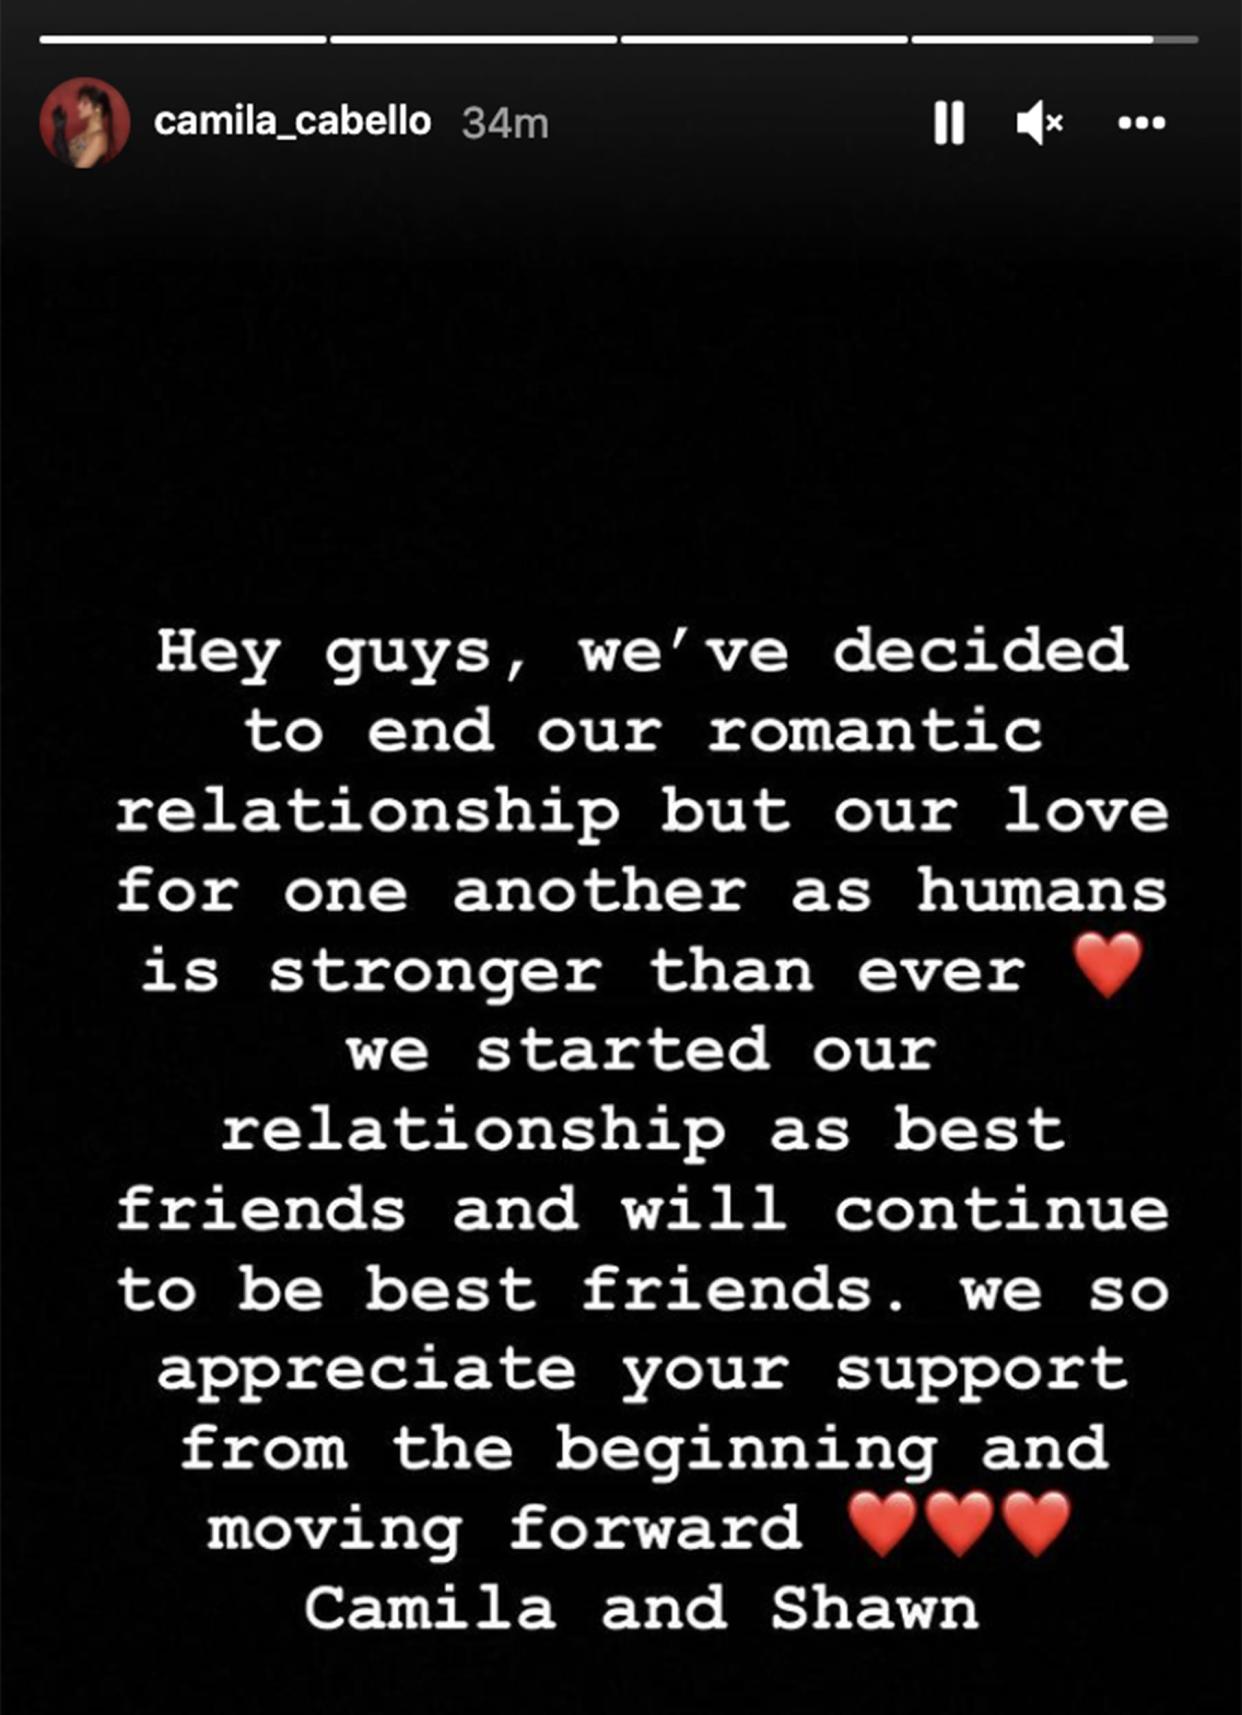 Both Cabello and Mendes shared the same statement from their Instagram accounts on Nov. 17, 2021. (Camilla Cabello / Instagram)